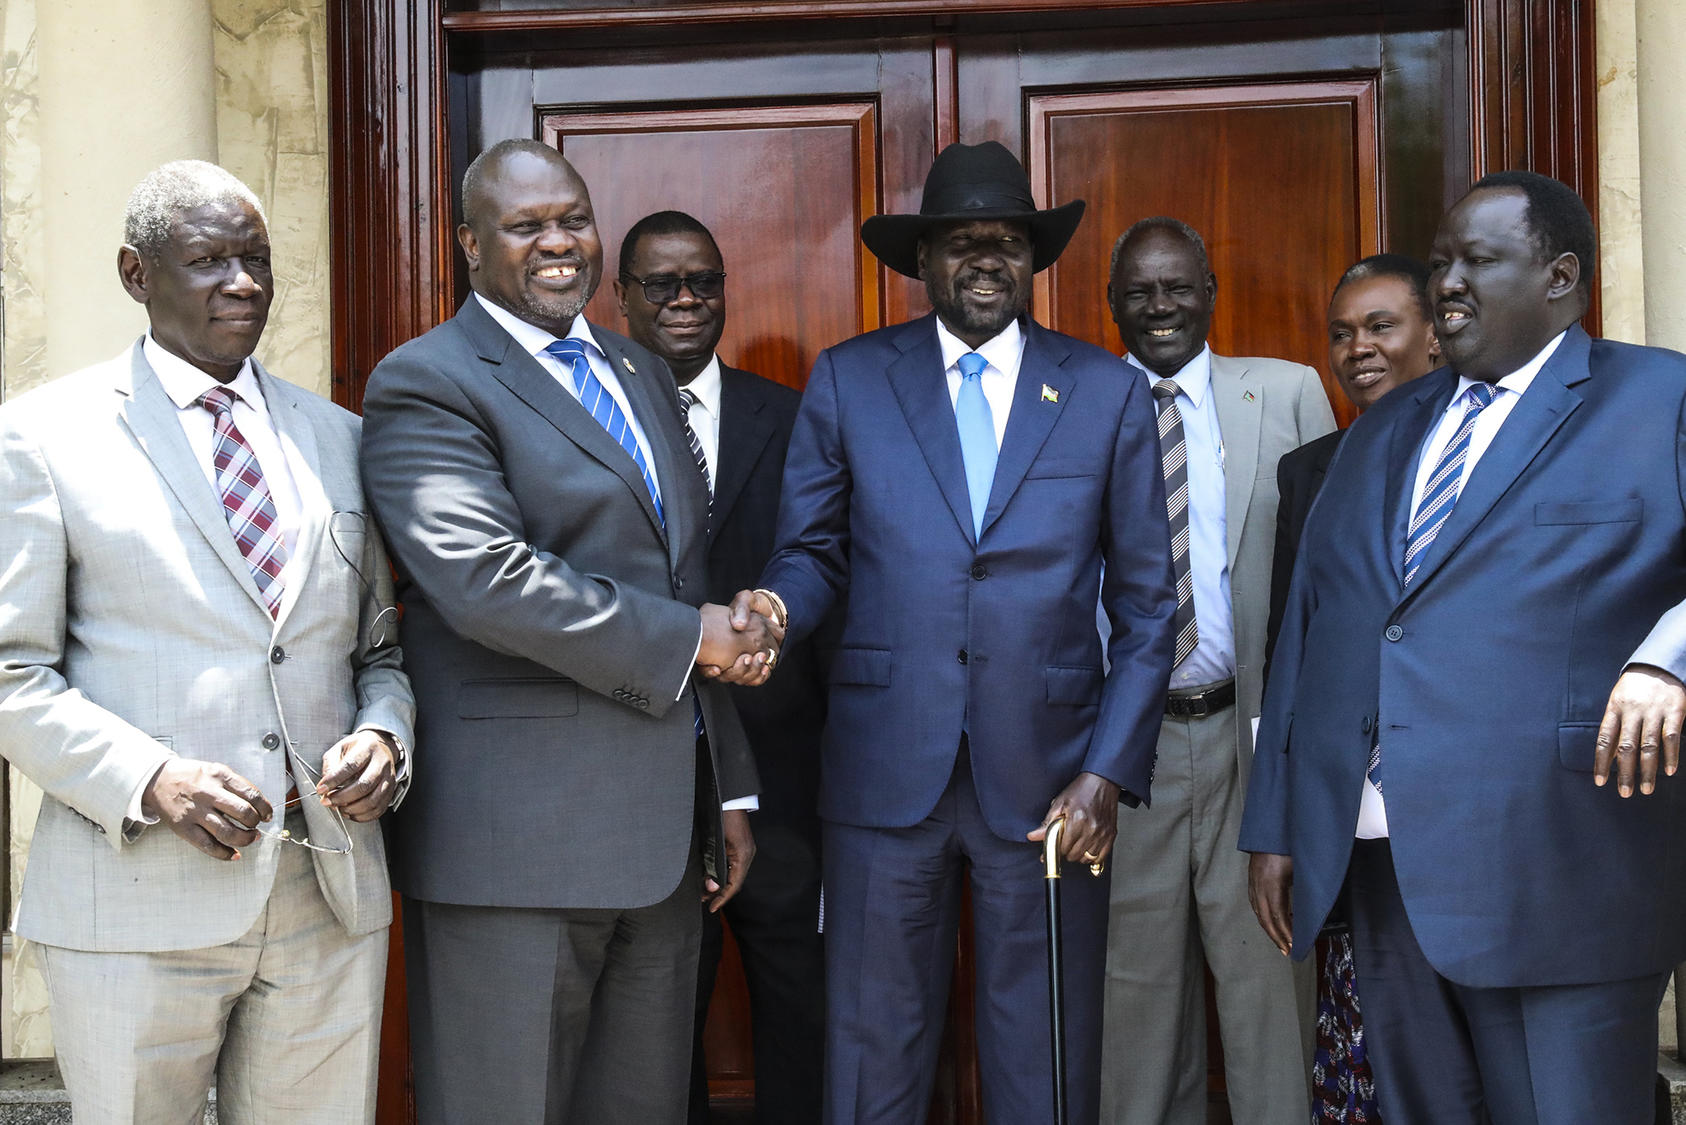 Salva Kiir (center right), president of the Republic of South Sudan, shakes hands with Riek Machar, opposition leader, at the Presidential Palace in Juba, Sept. 11, 2019 (UN Photo/Isaac Billy)